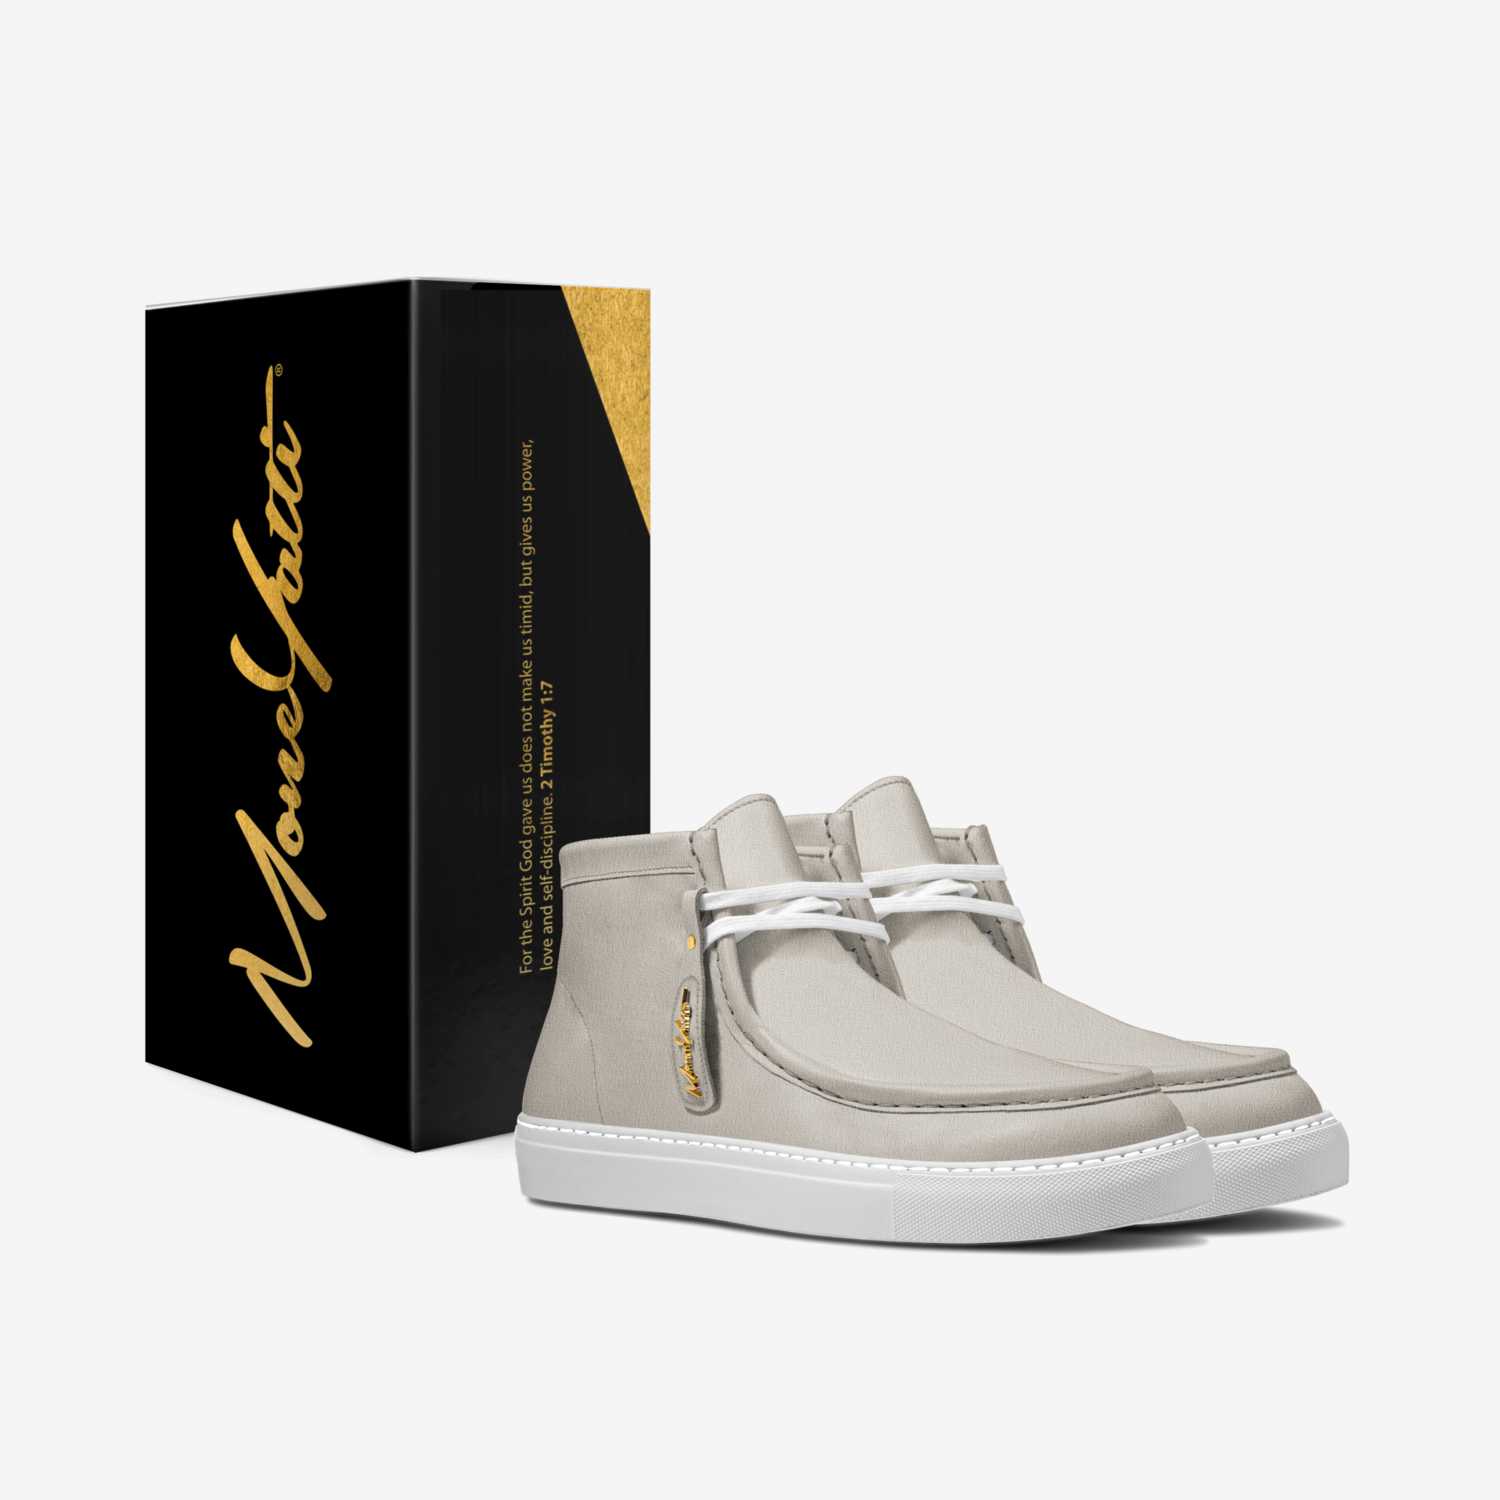 LUX SUEDE 017 custom made in Italy shoes by Moneyatti Brand | Box view